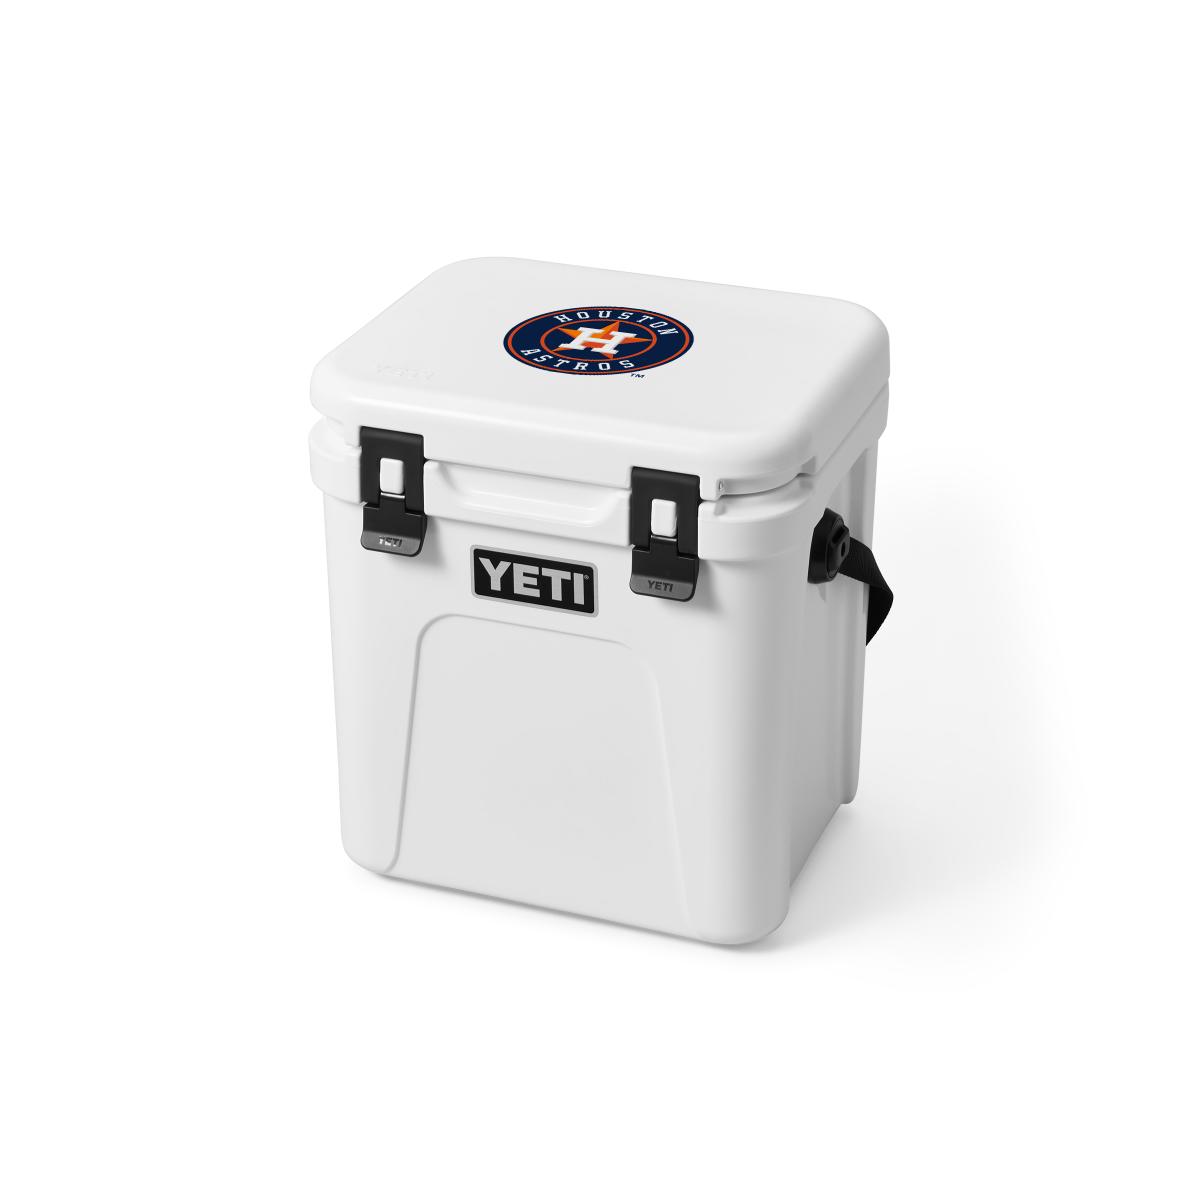 Houston Astros YETI Coolers and Drinkware, where to buy Astros YETI gear  now - FanNation